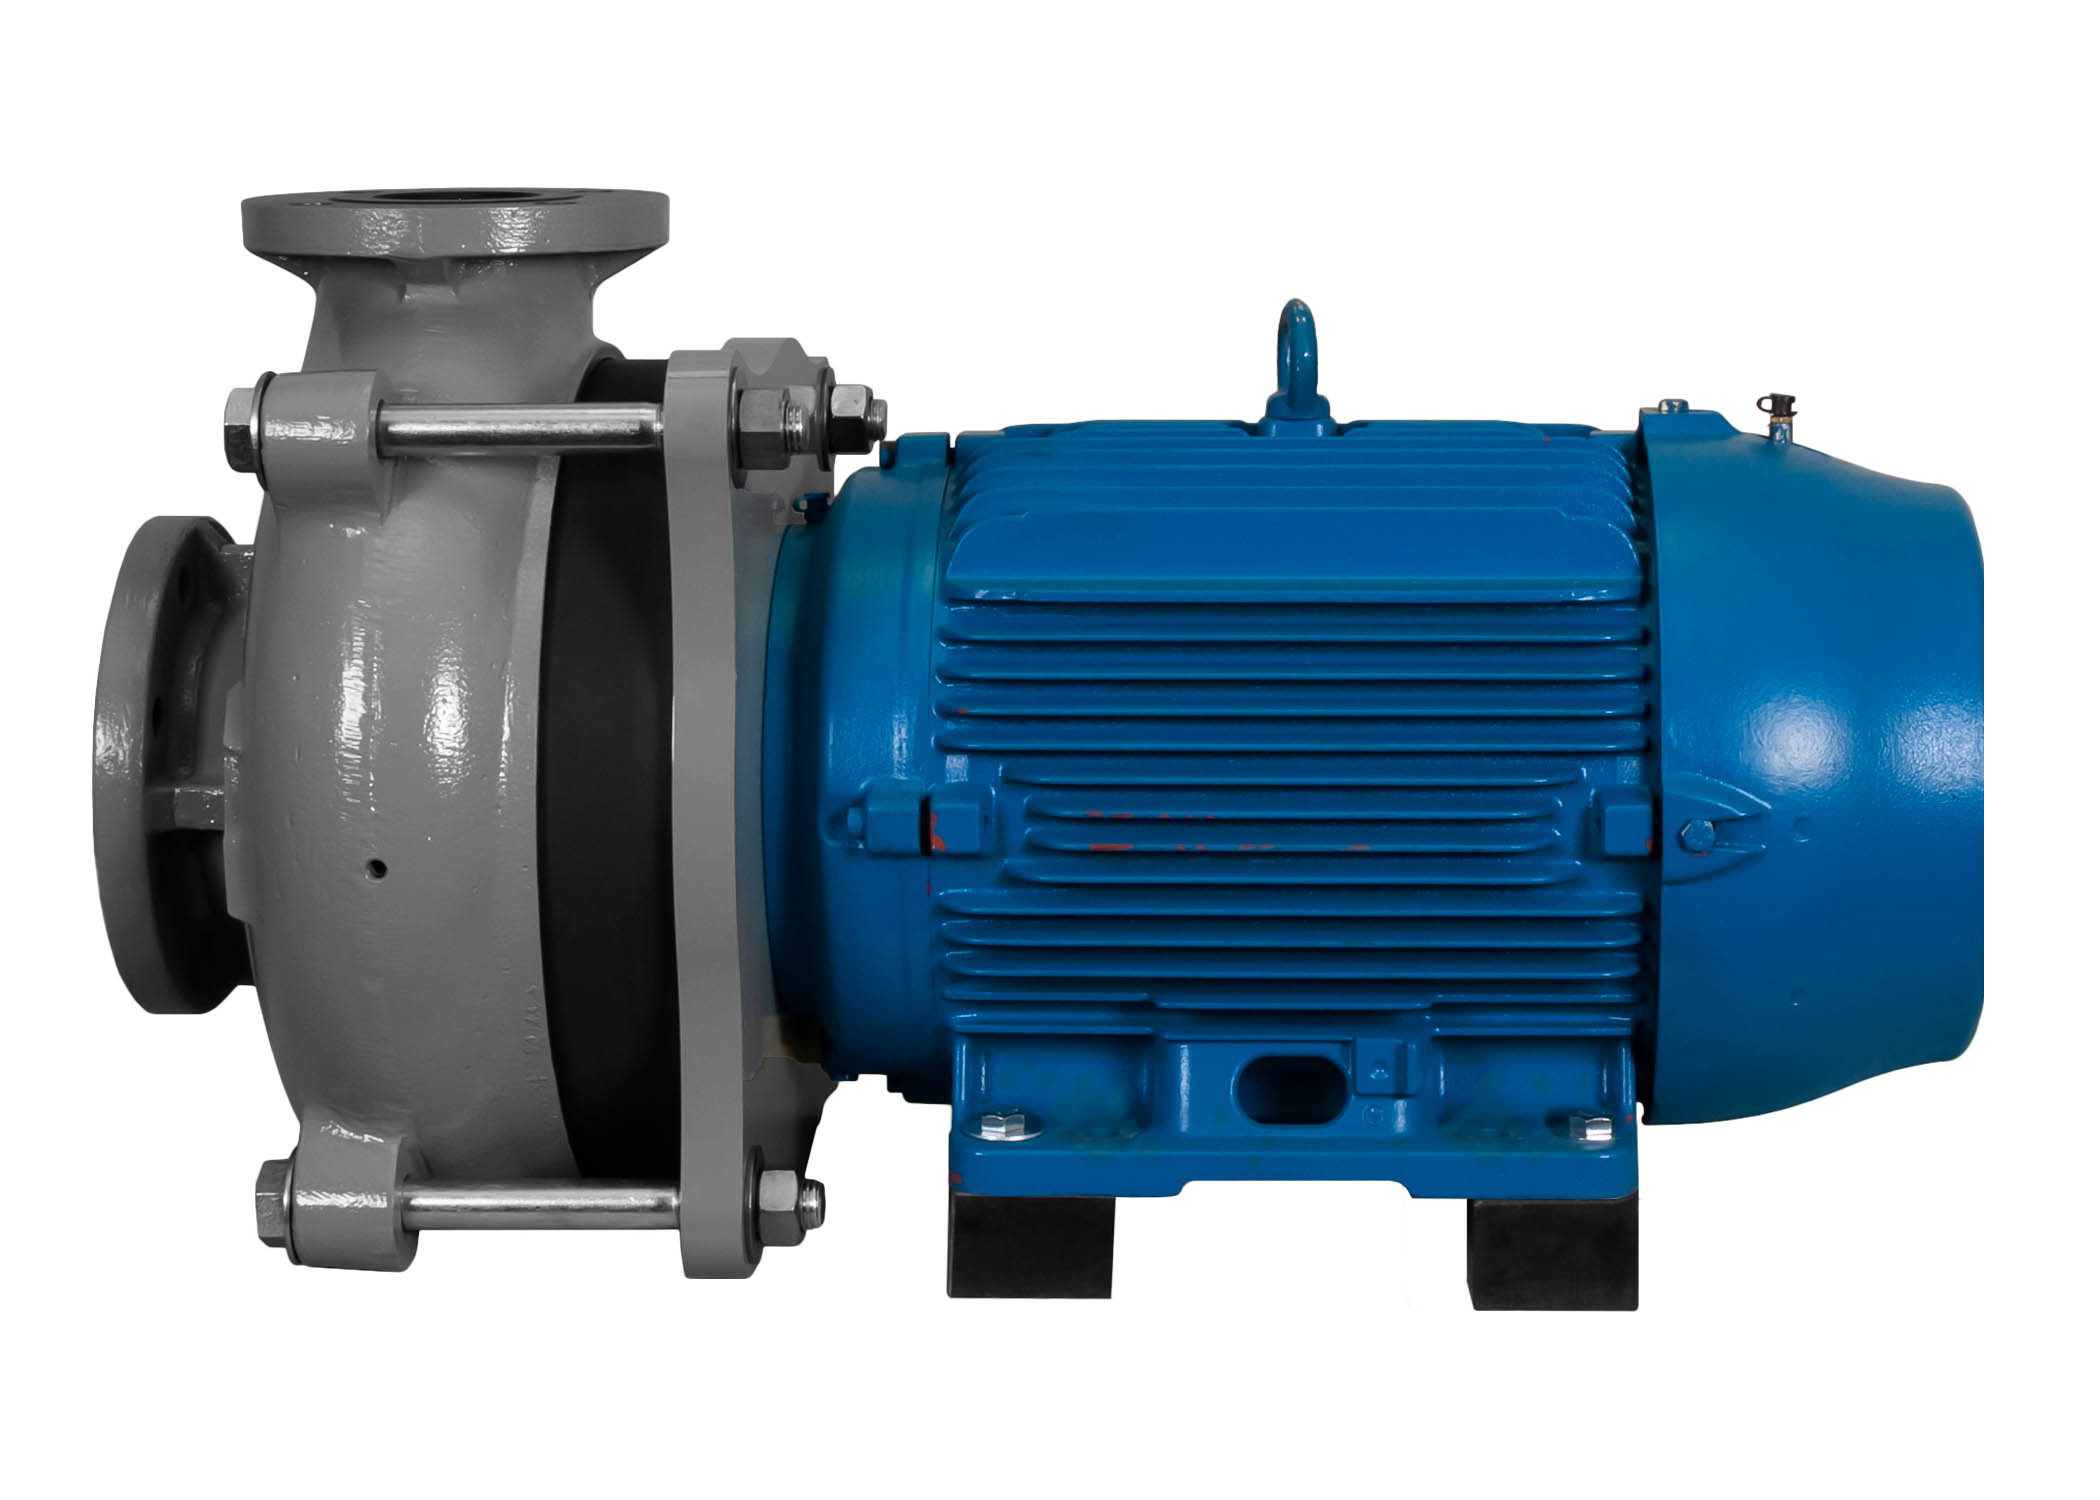 C-Shell 4x3-10 Pump with blue WEG Motor right side view